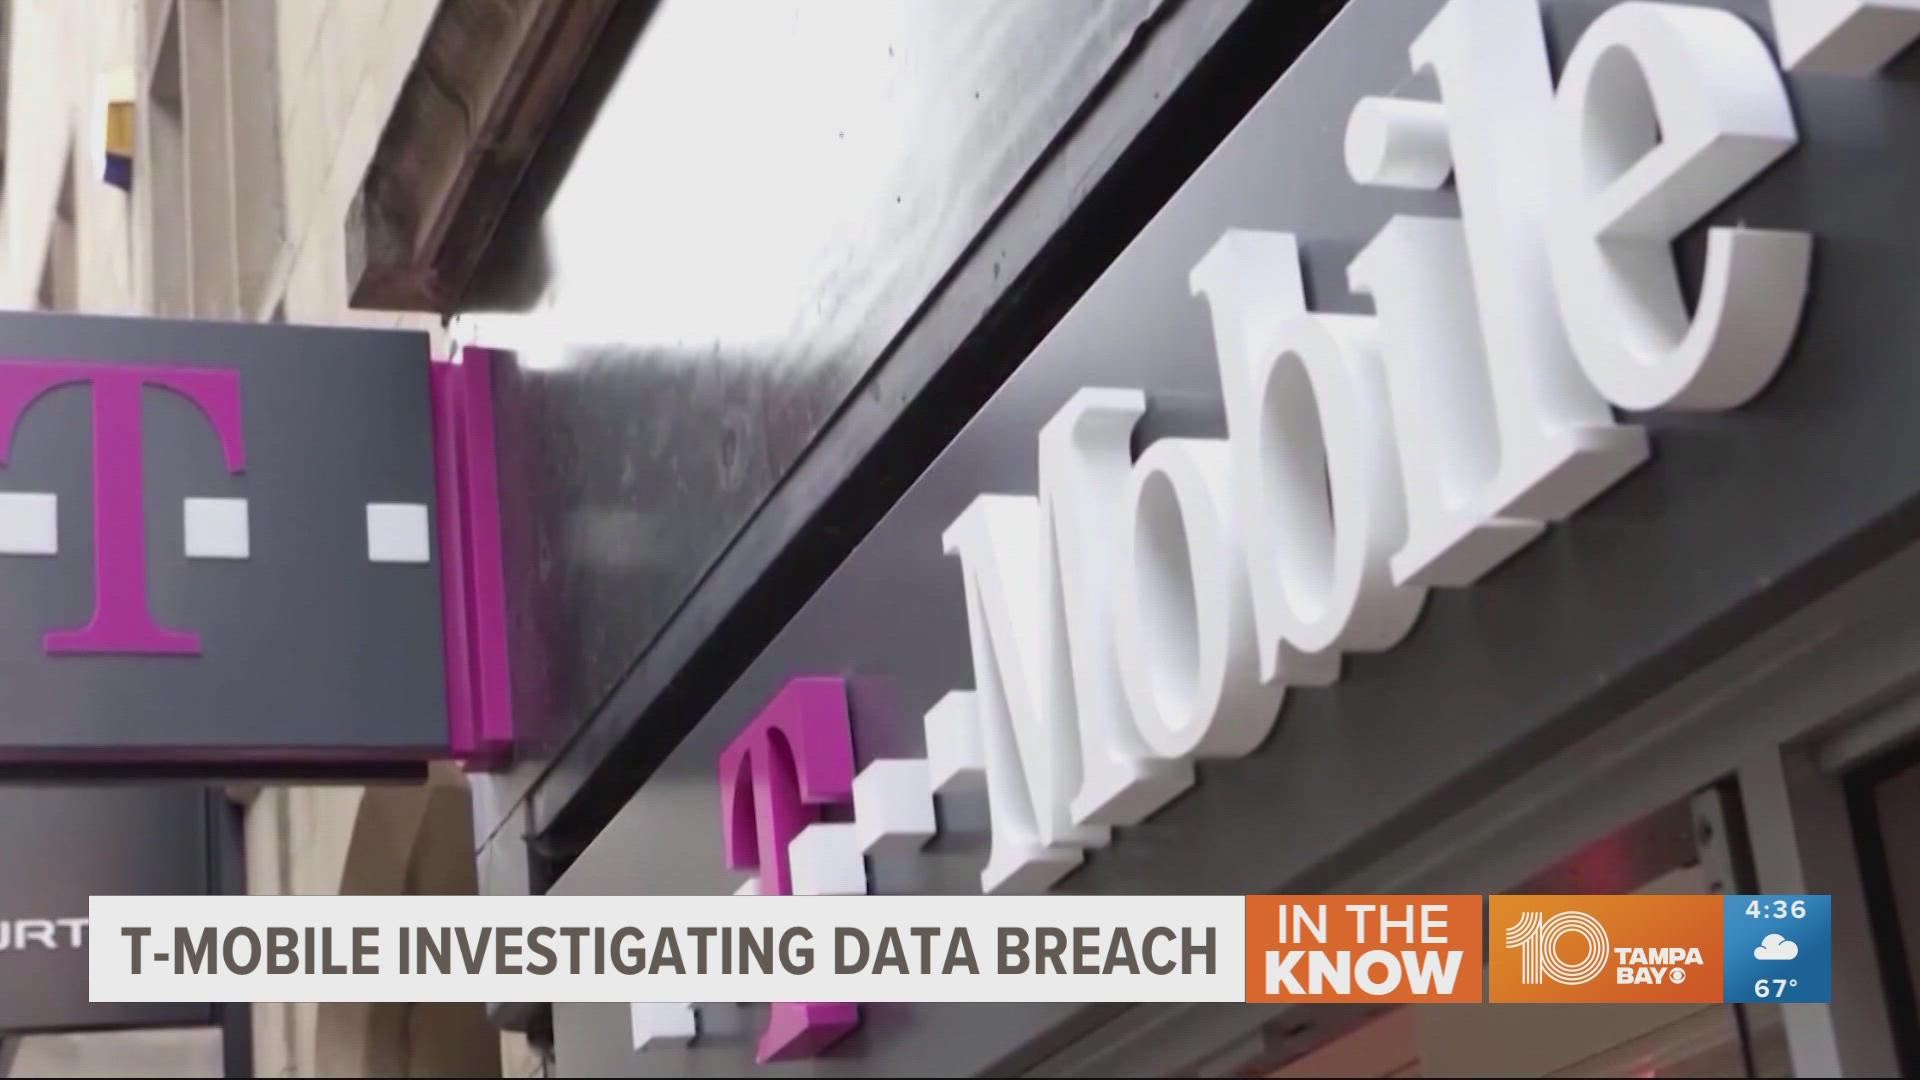 T-Mobile said its investigation so far found the stolen data did not include passwords, PINs, bank account or credit card information.